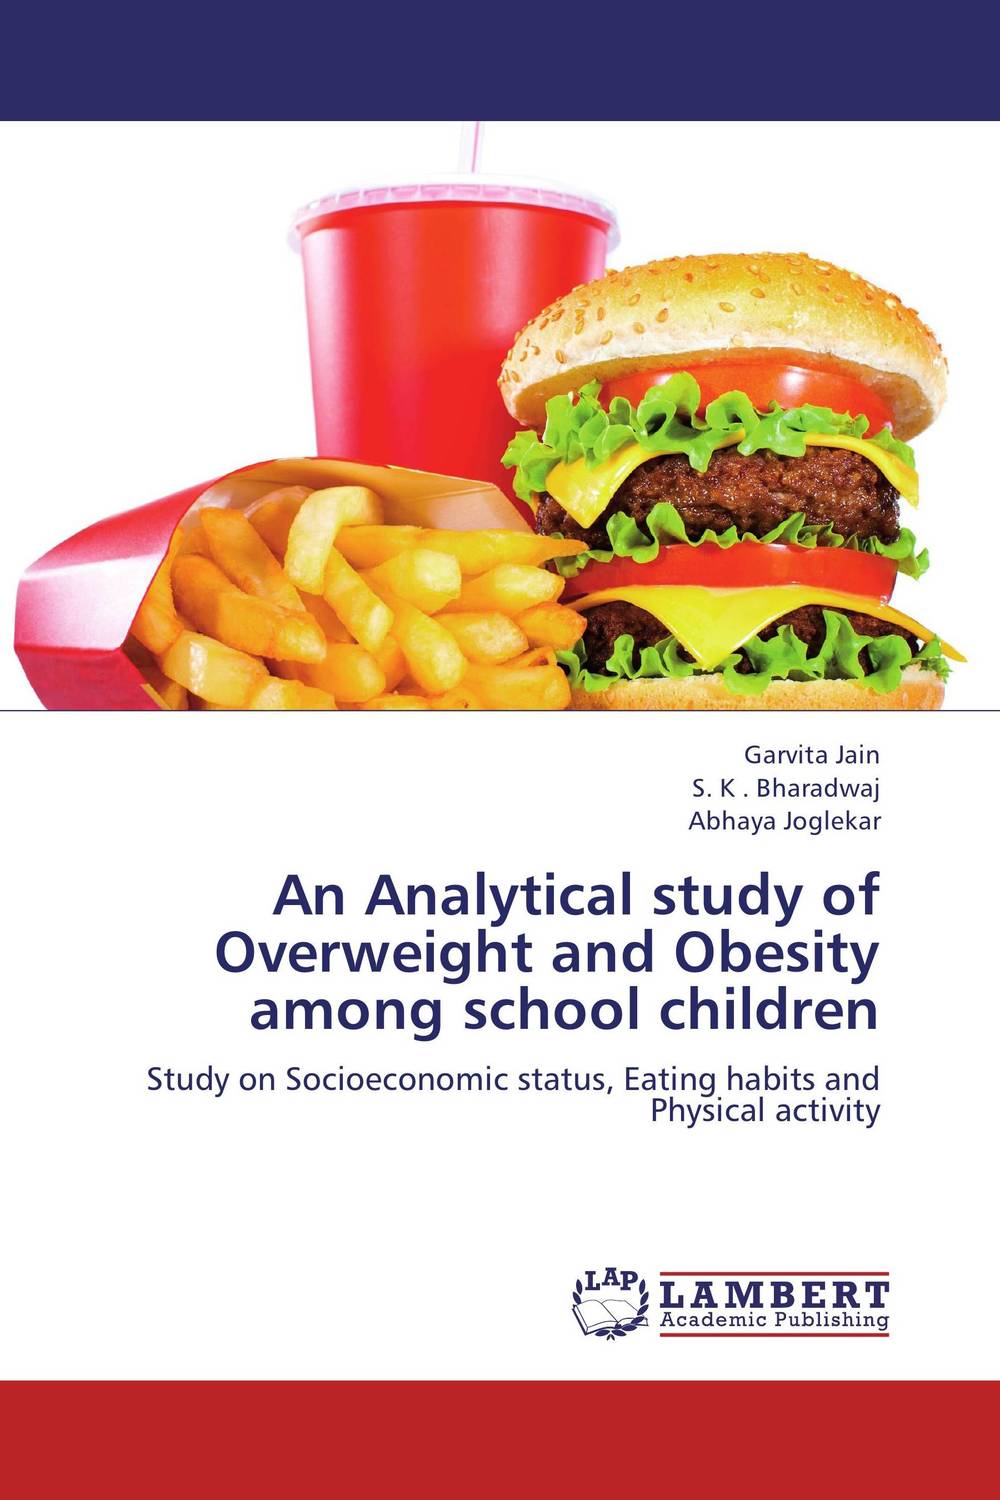 An Analytical study of Overweight and Obesity among school children